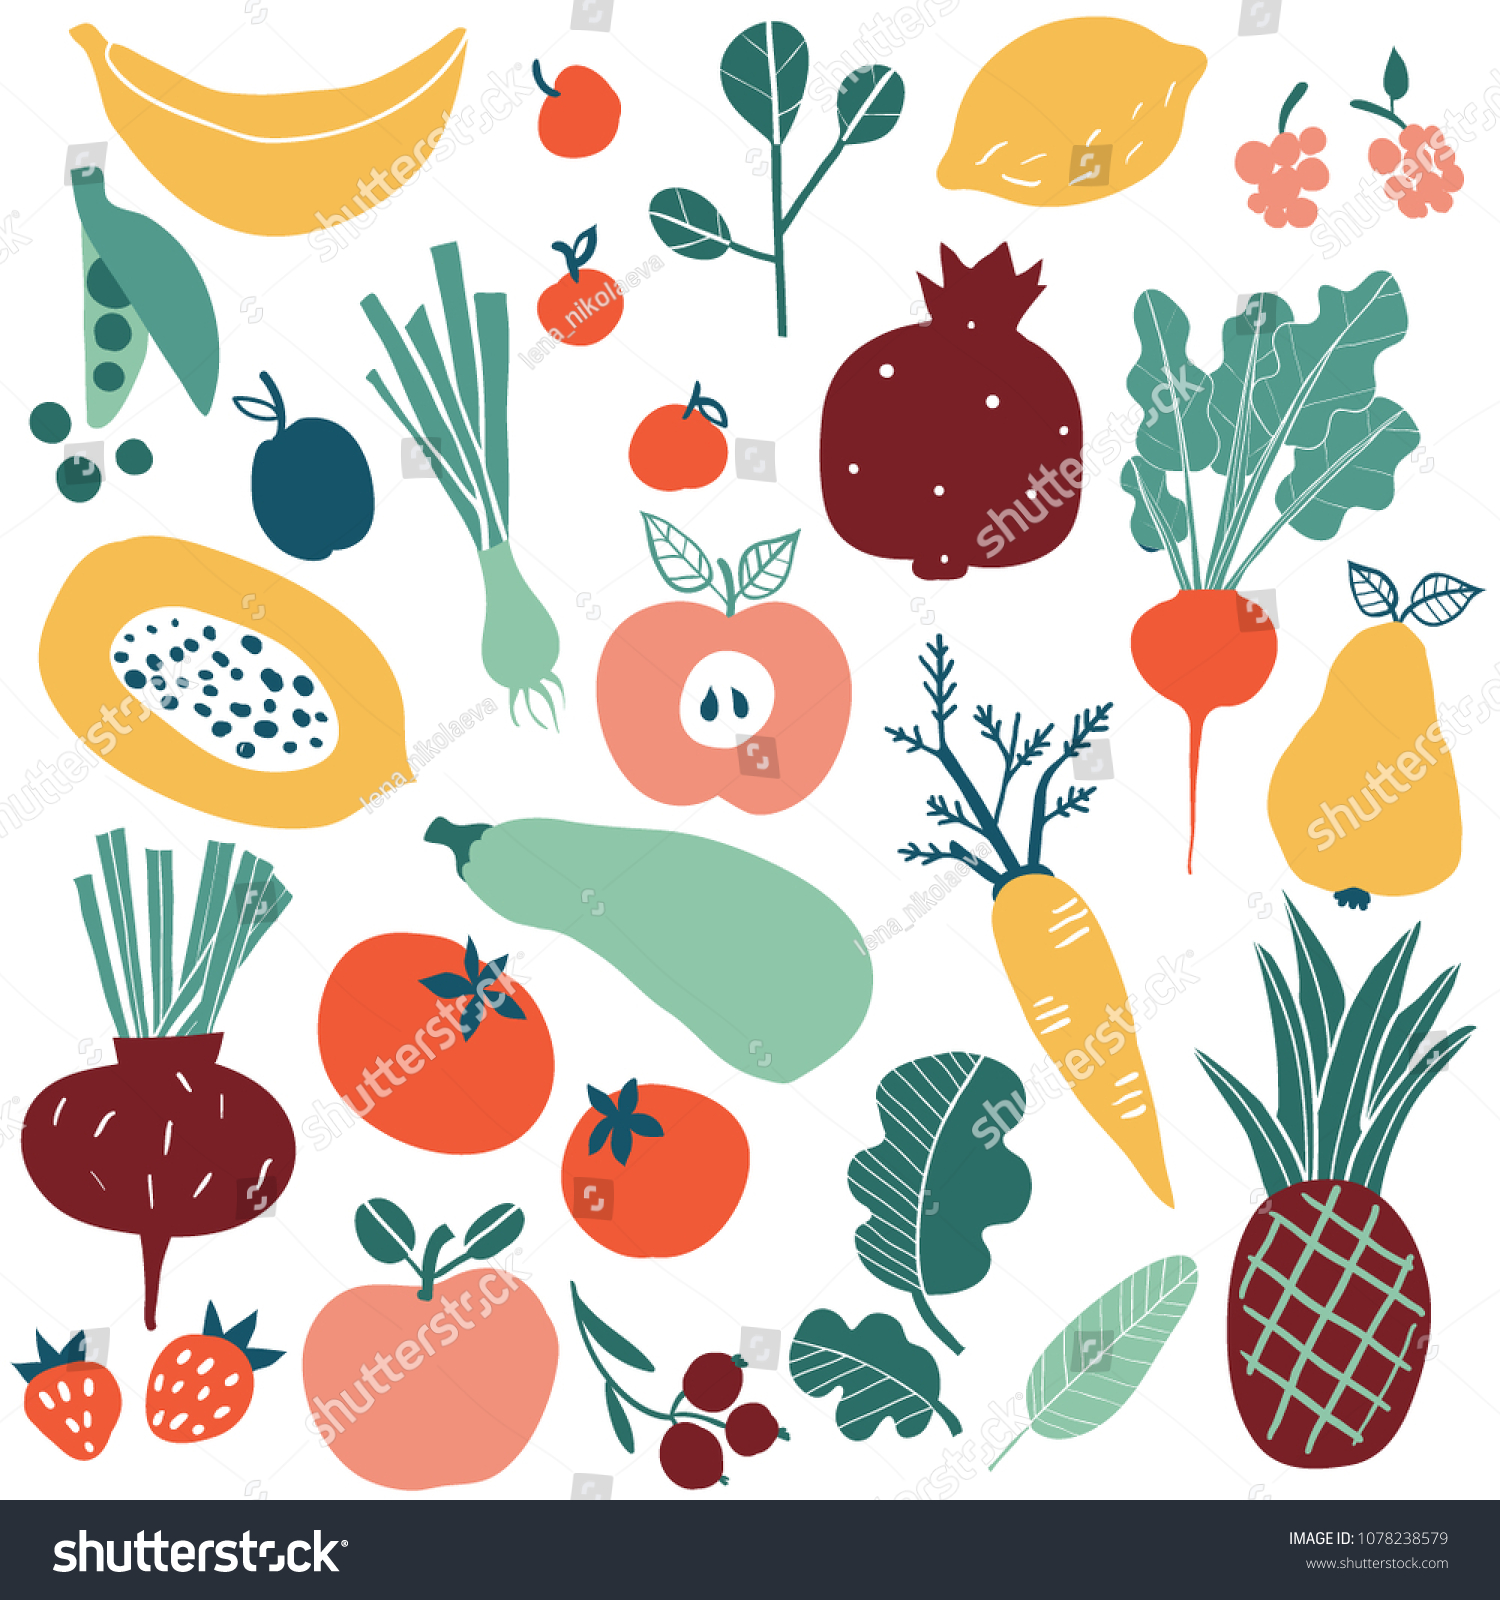 Set with hand drawn colorful doodle fruits and vegetables. Sketch style big vector collection. Flat icons set: berries, carrot, onion, tomato, apple, pineapple, beet, pear, peas, strawberry, lemon.  #1078238579